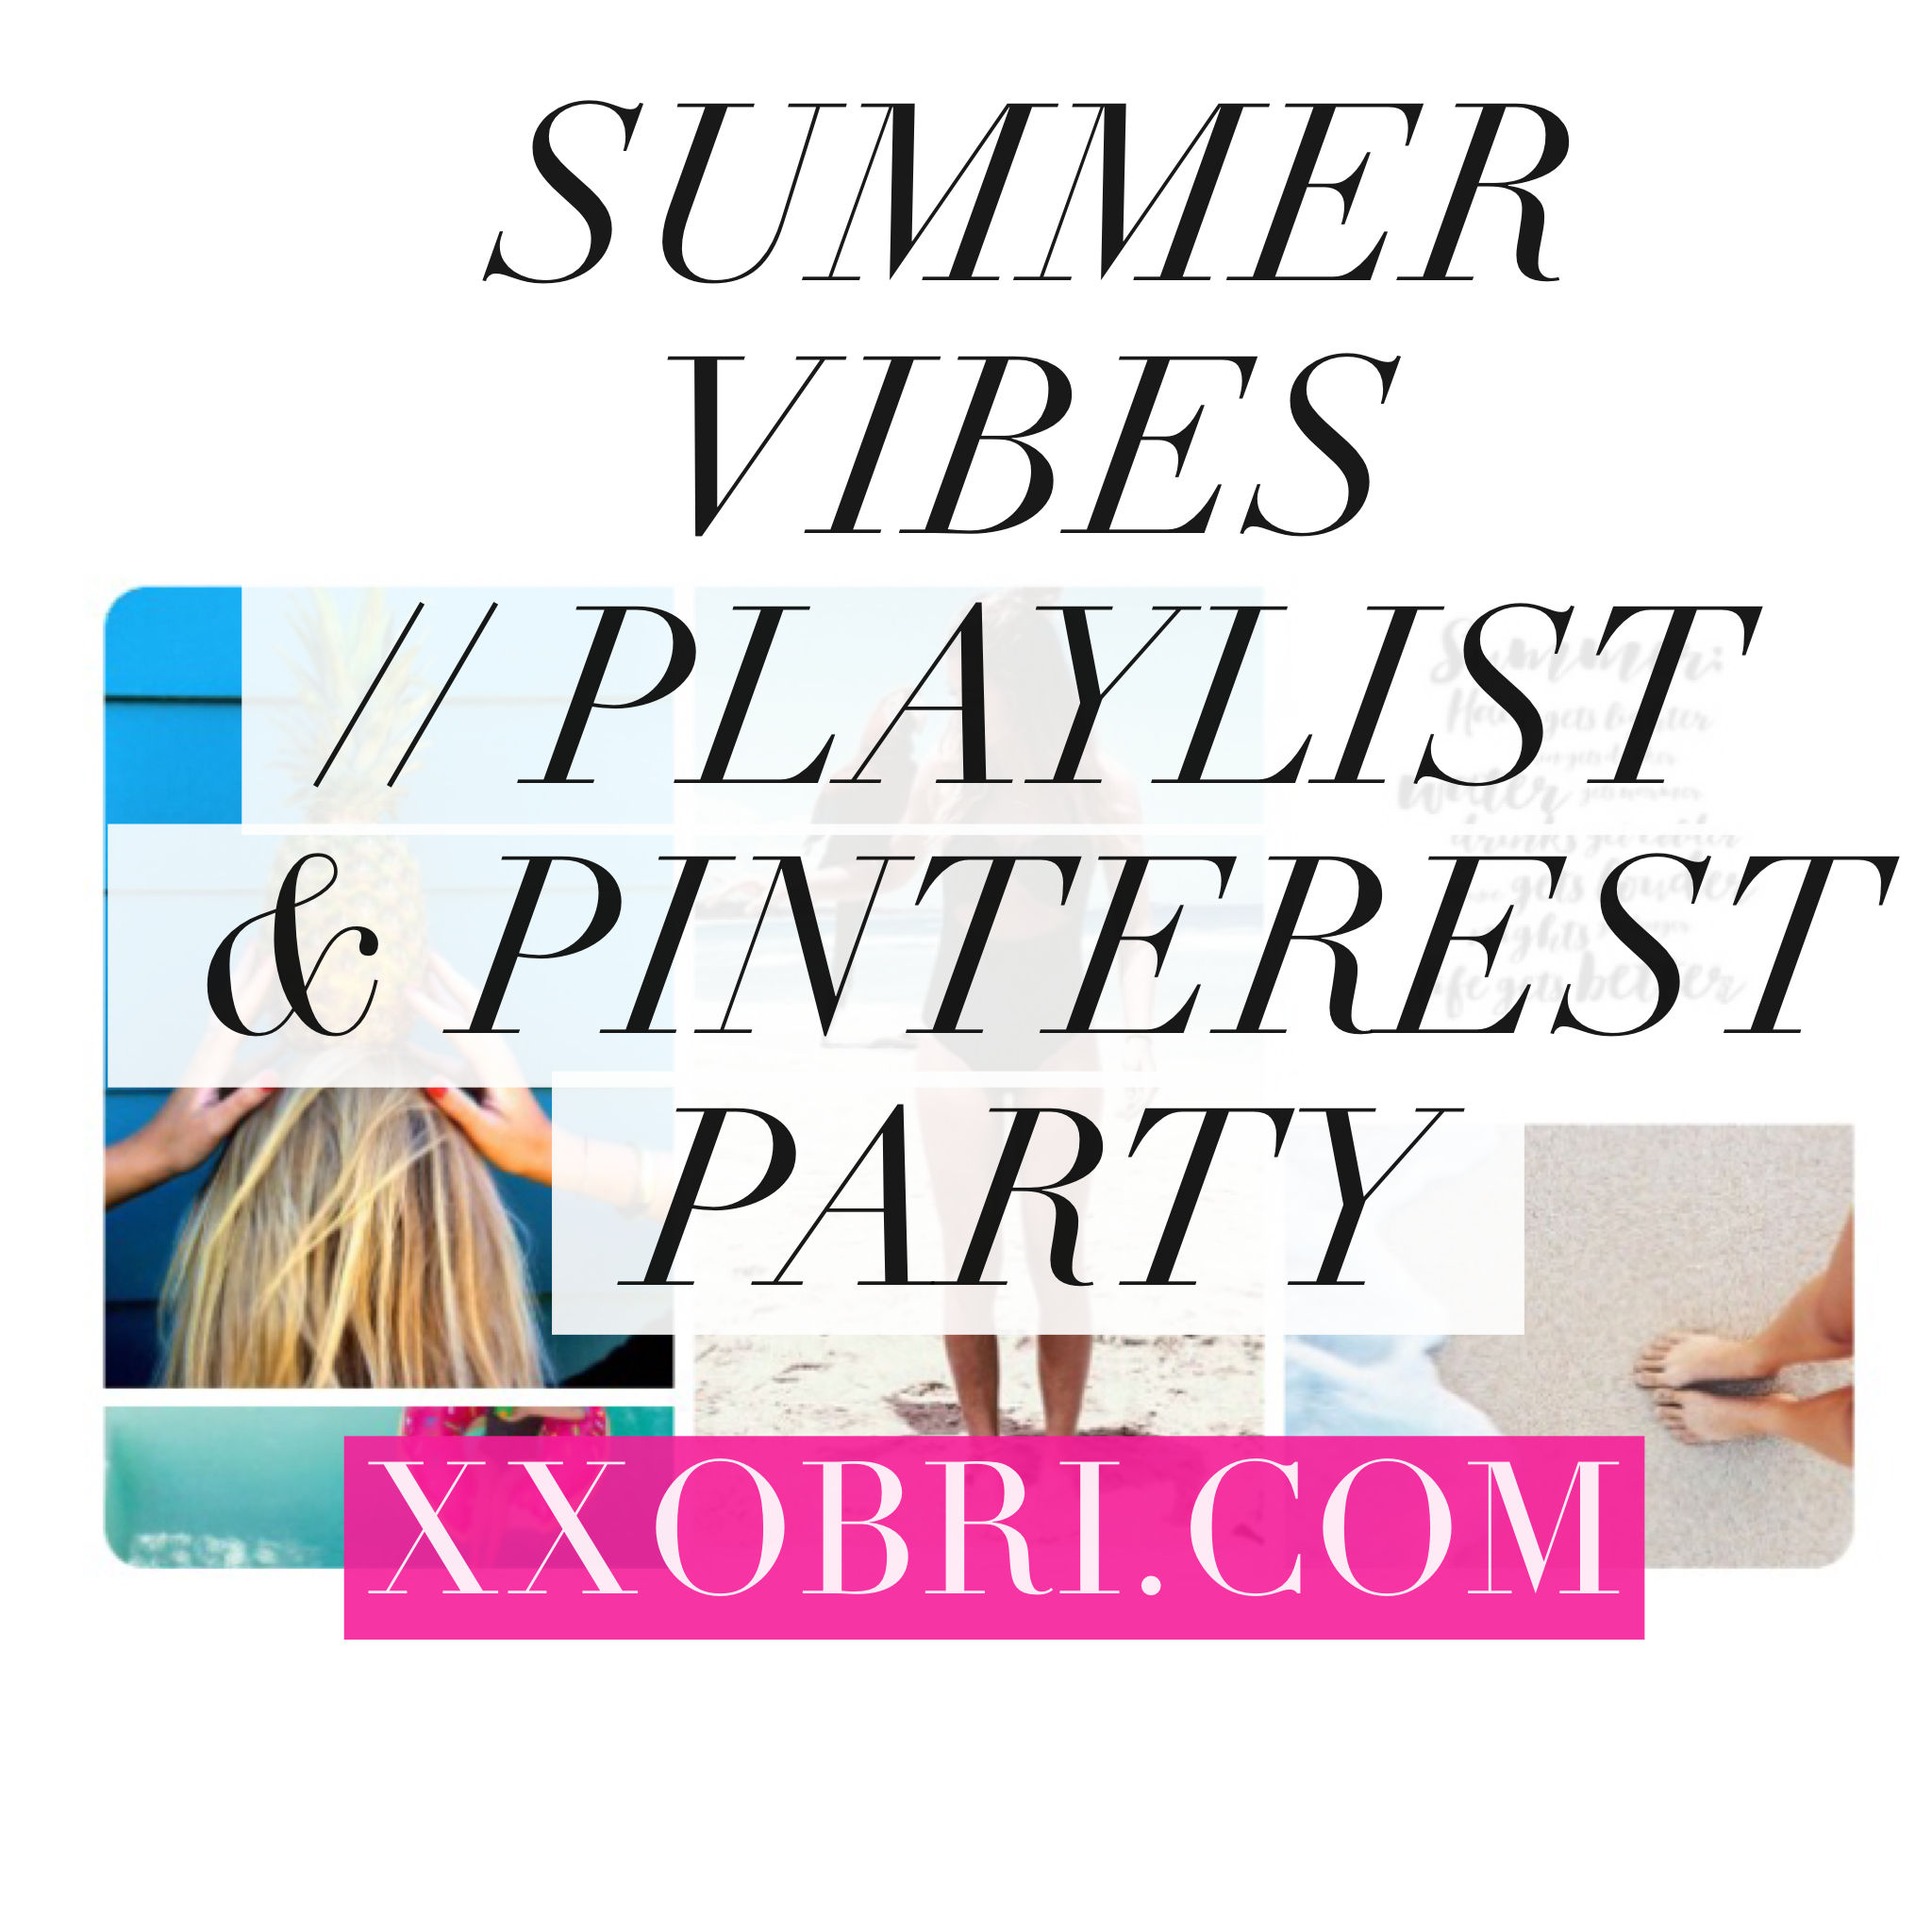 SUMMER_VIBES_PLAYLIST_PINTEREST_LINK_PARTY.PNG